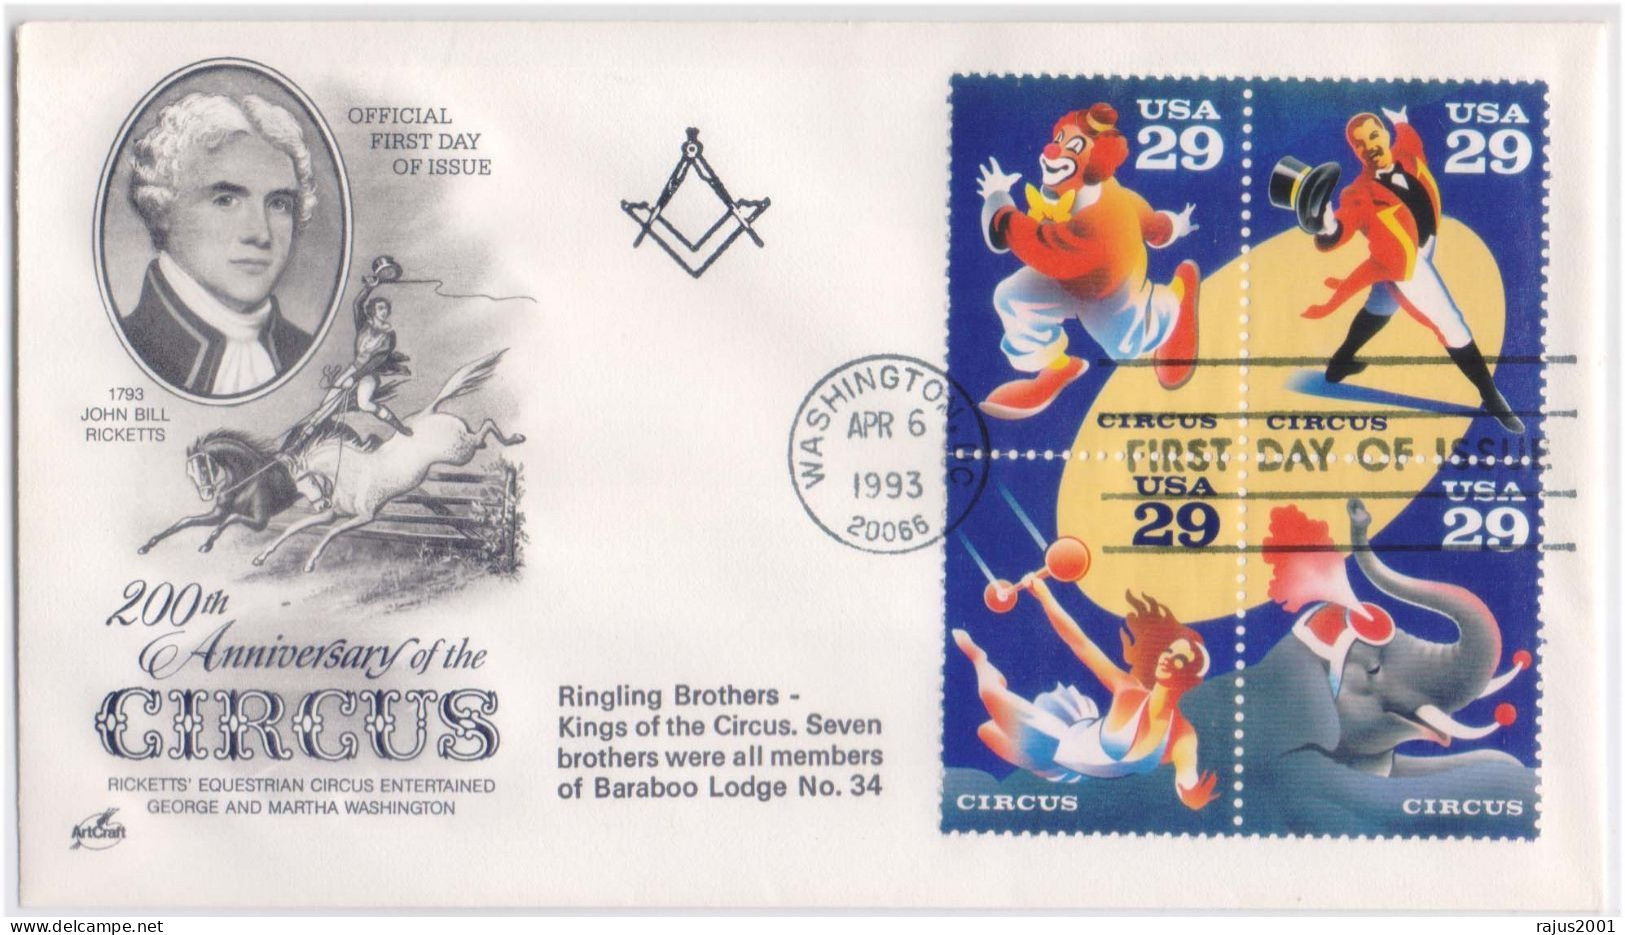 Ringling Brothers Kings Of The Circus. Member Of Baraboo Lodge No. 34, Freemasonry, Masonic Limited Only 90 Cover Issued - Franc-Maçonnerie